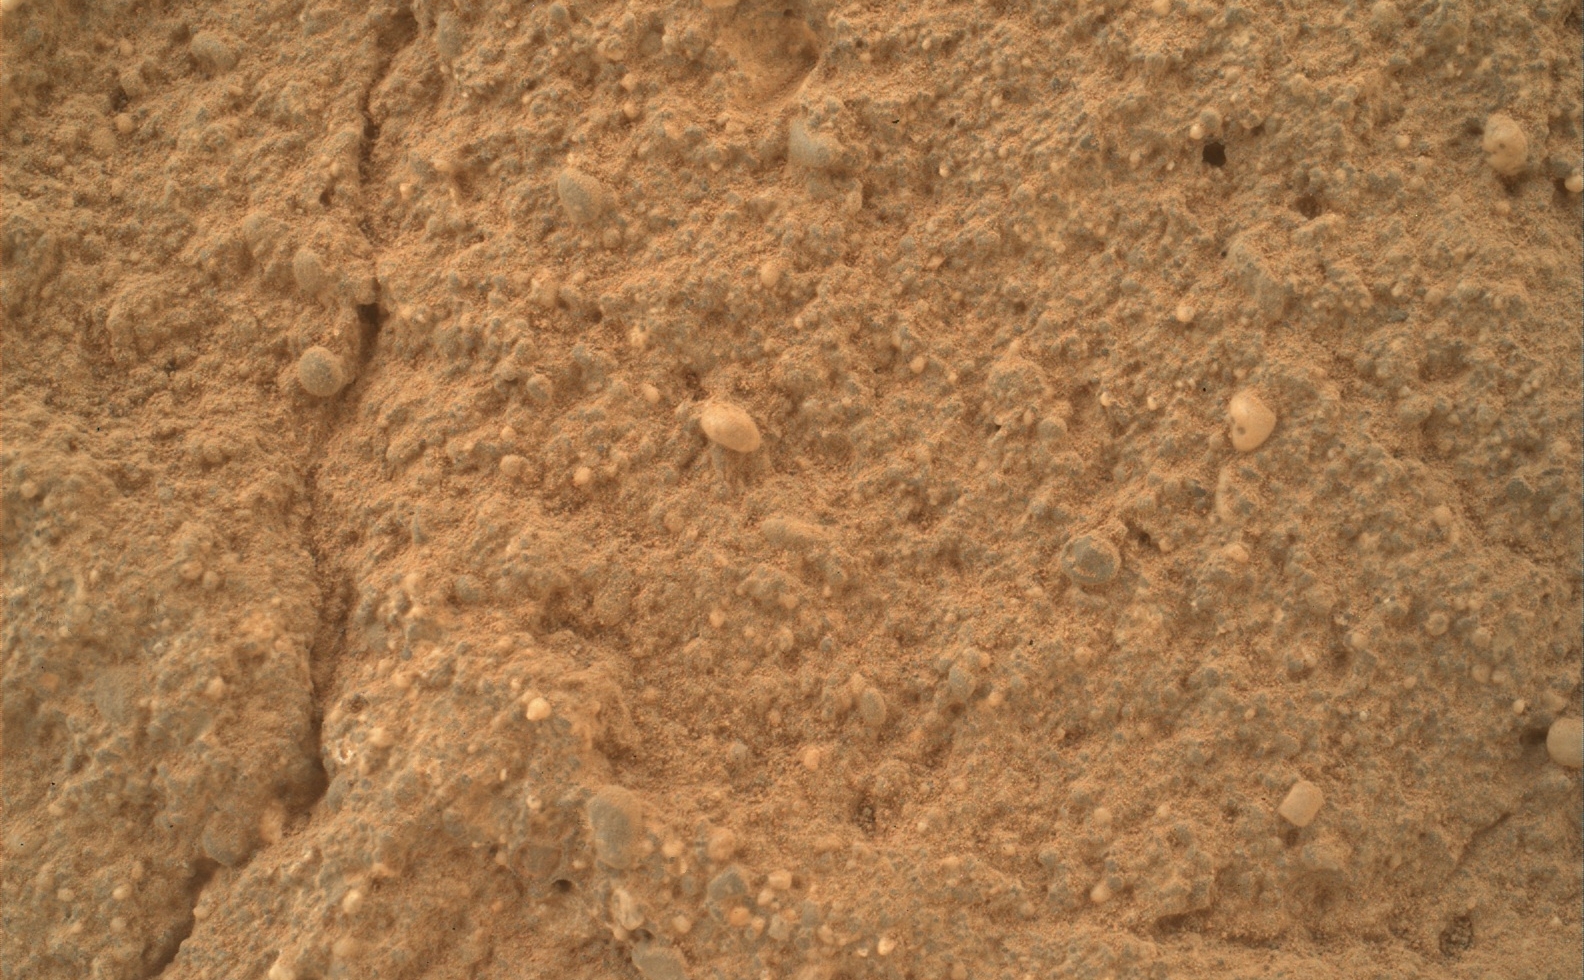 This view of a sandstone target called "Big Arm" covers an area about 1.3 inches (33 millimeters) wide in detail that shows differing shapes and colors of sand grains in the stone.